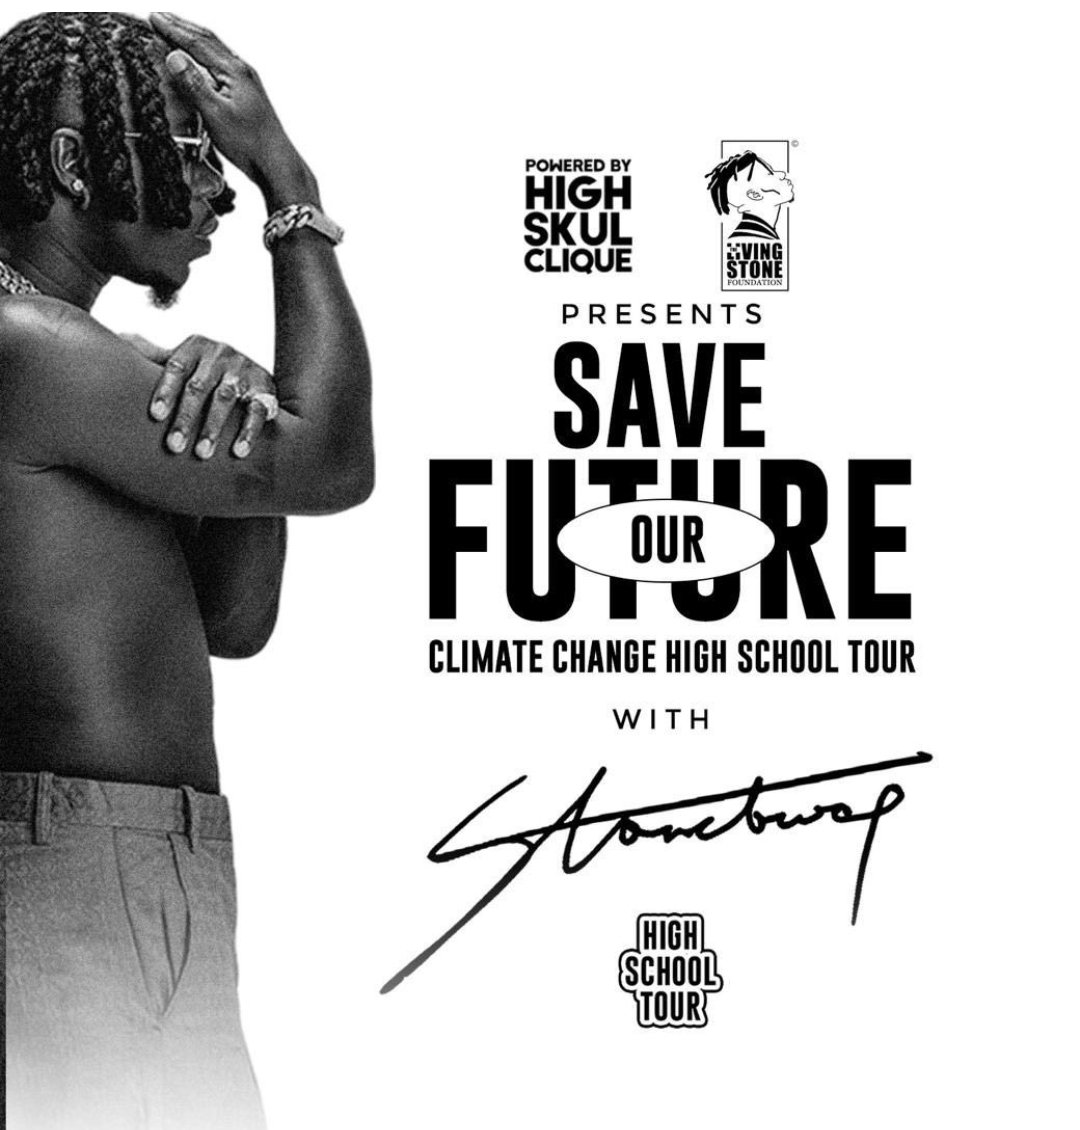 High Skul Clique & Stonebwoy [@stonebwoy] “Save Our Future Climate Change” High School Tour coming soon 🔥 ____ Lyrical Joe king Promise Sarkodie Shatta Wale Dremo Davido